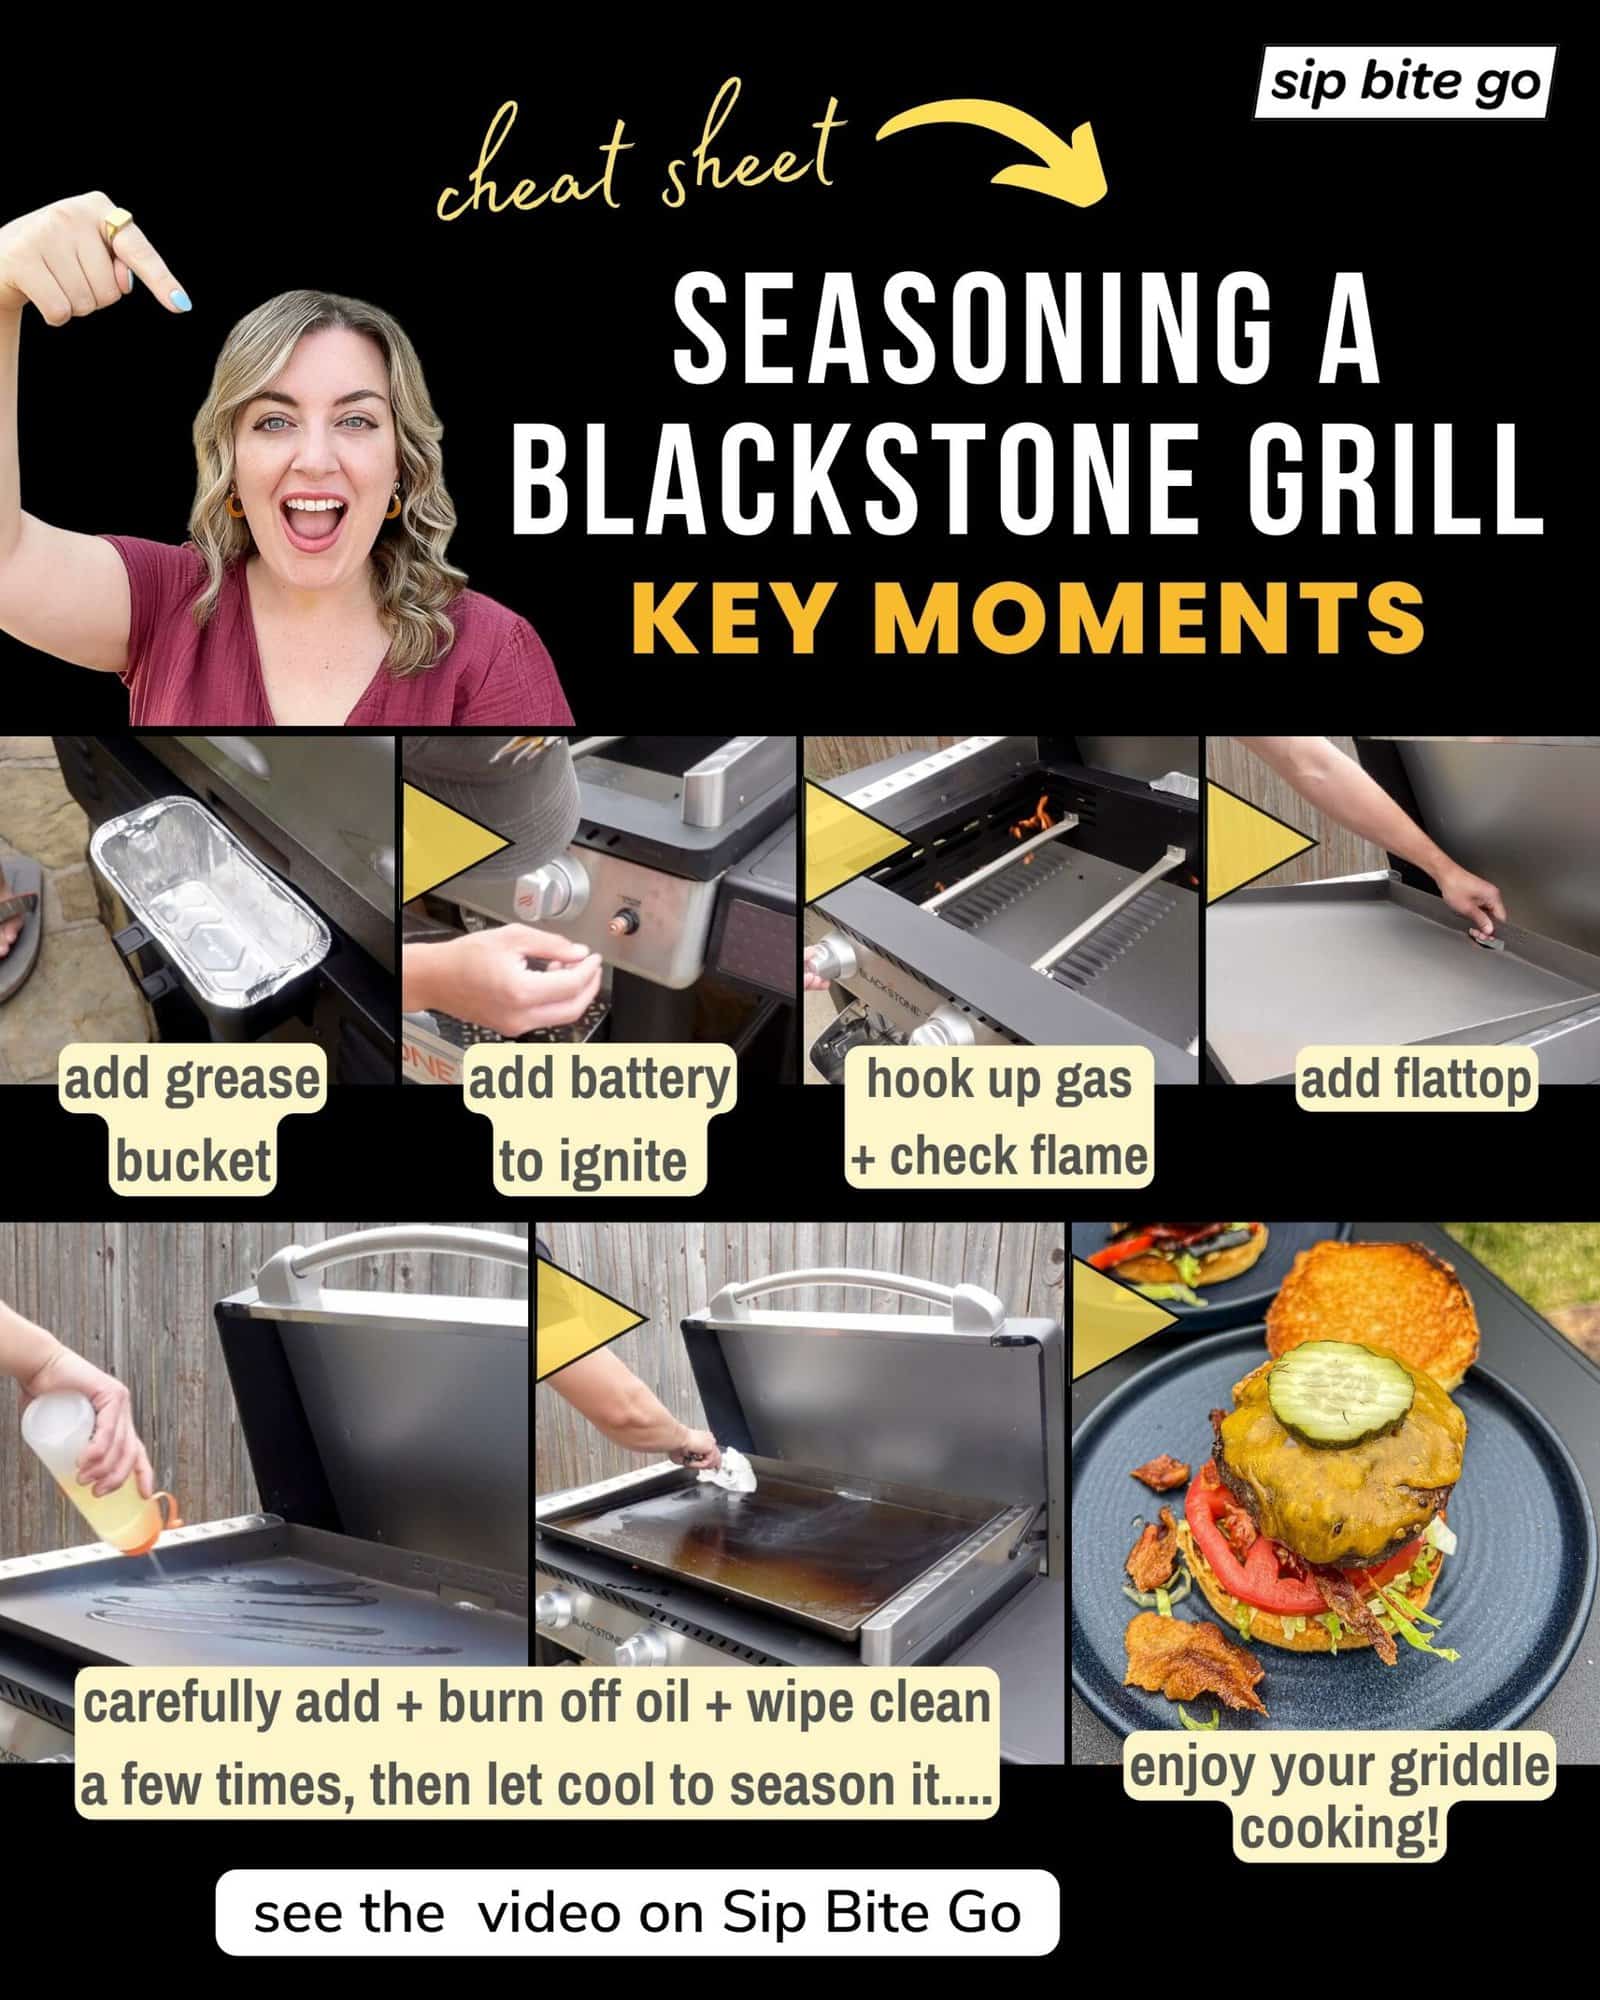 Infographic demonstrating how to season Blackstone Griddle Grill for the first time with captions and image steps with Sip Bite Go logo